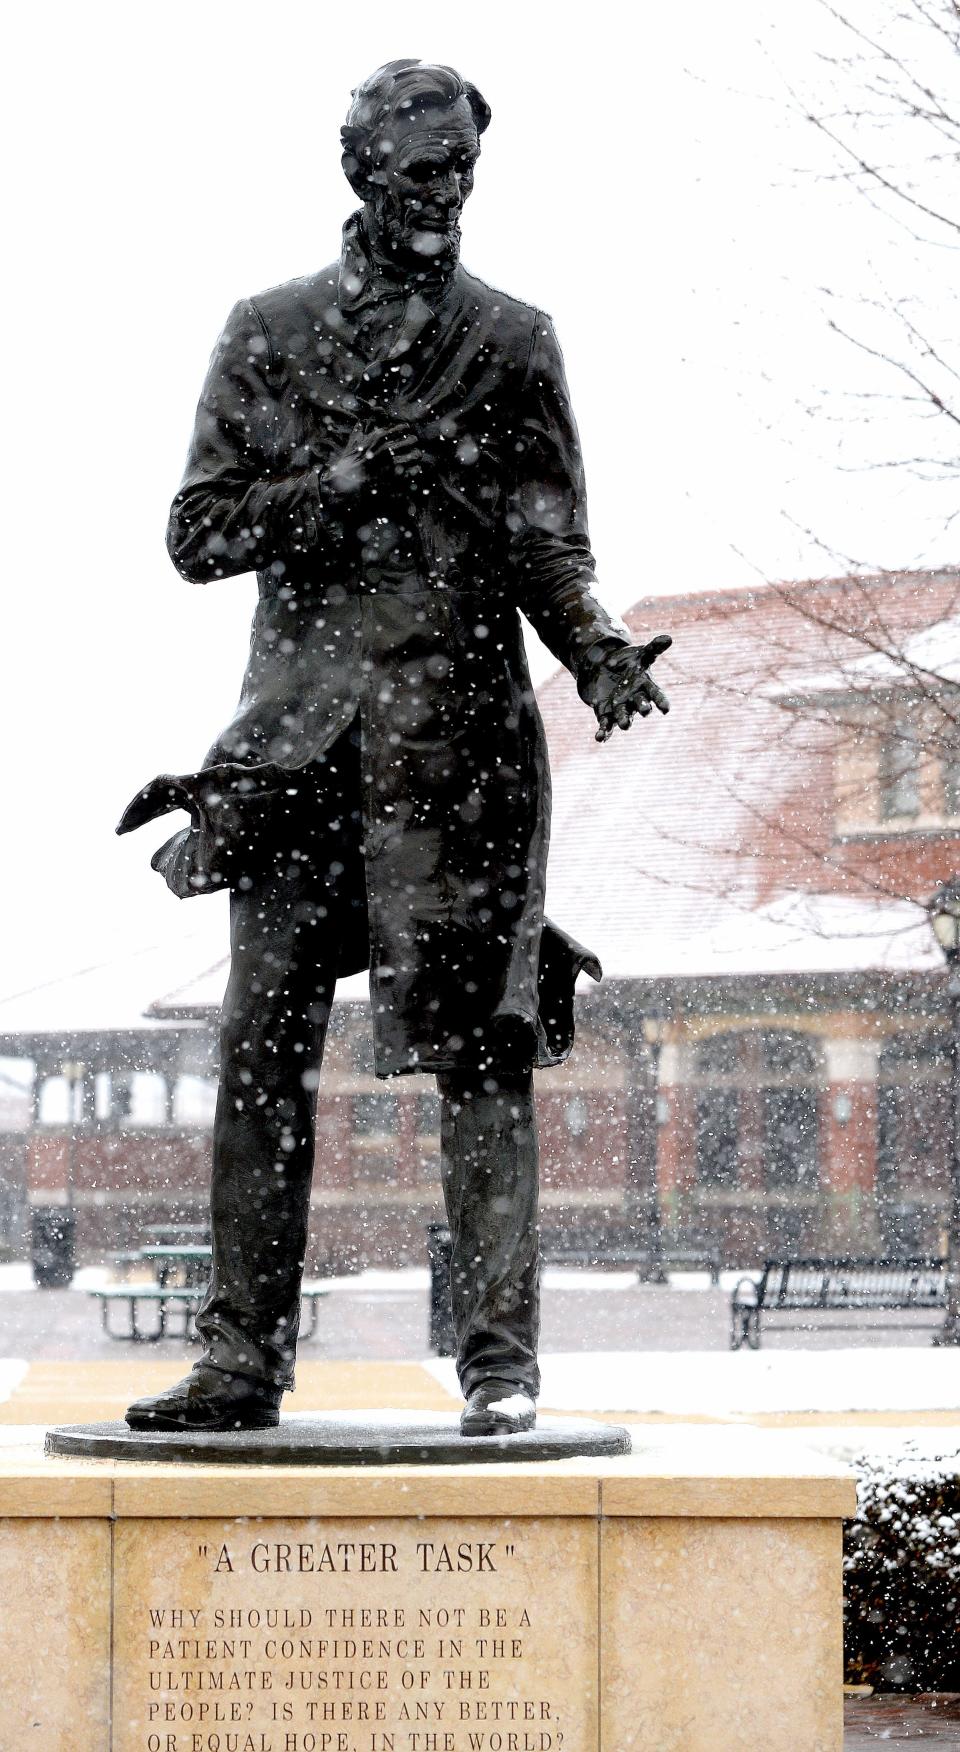 Snowflakes fall on the Abraham Lincoln statue in front of Springfield's Historic Union Station Wednesday.